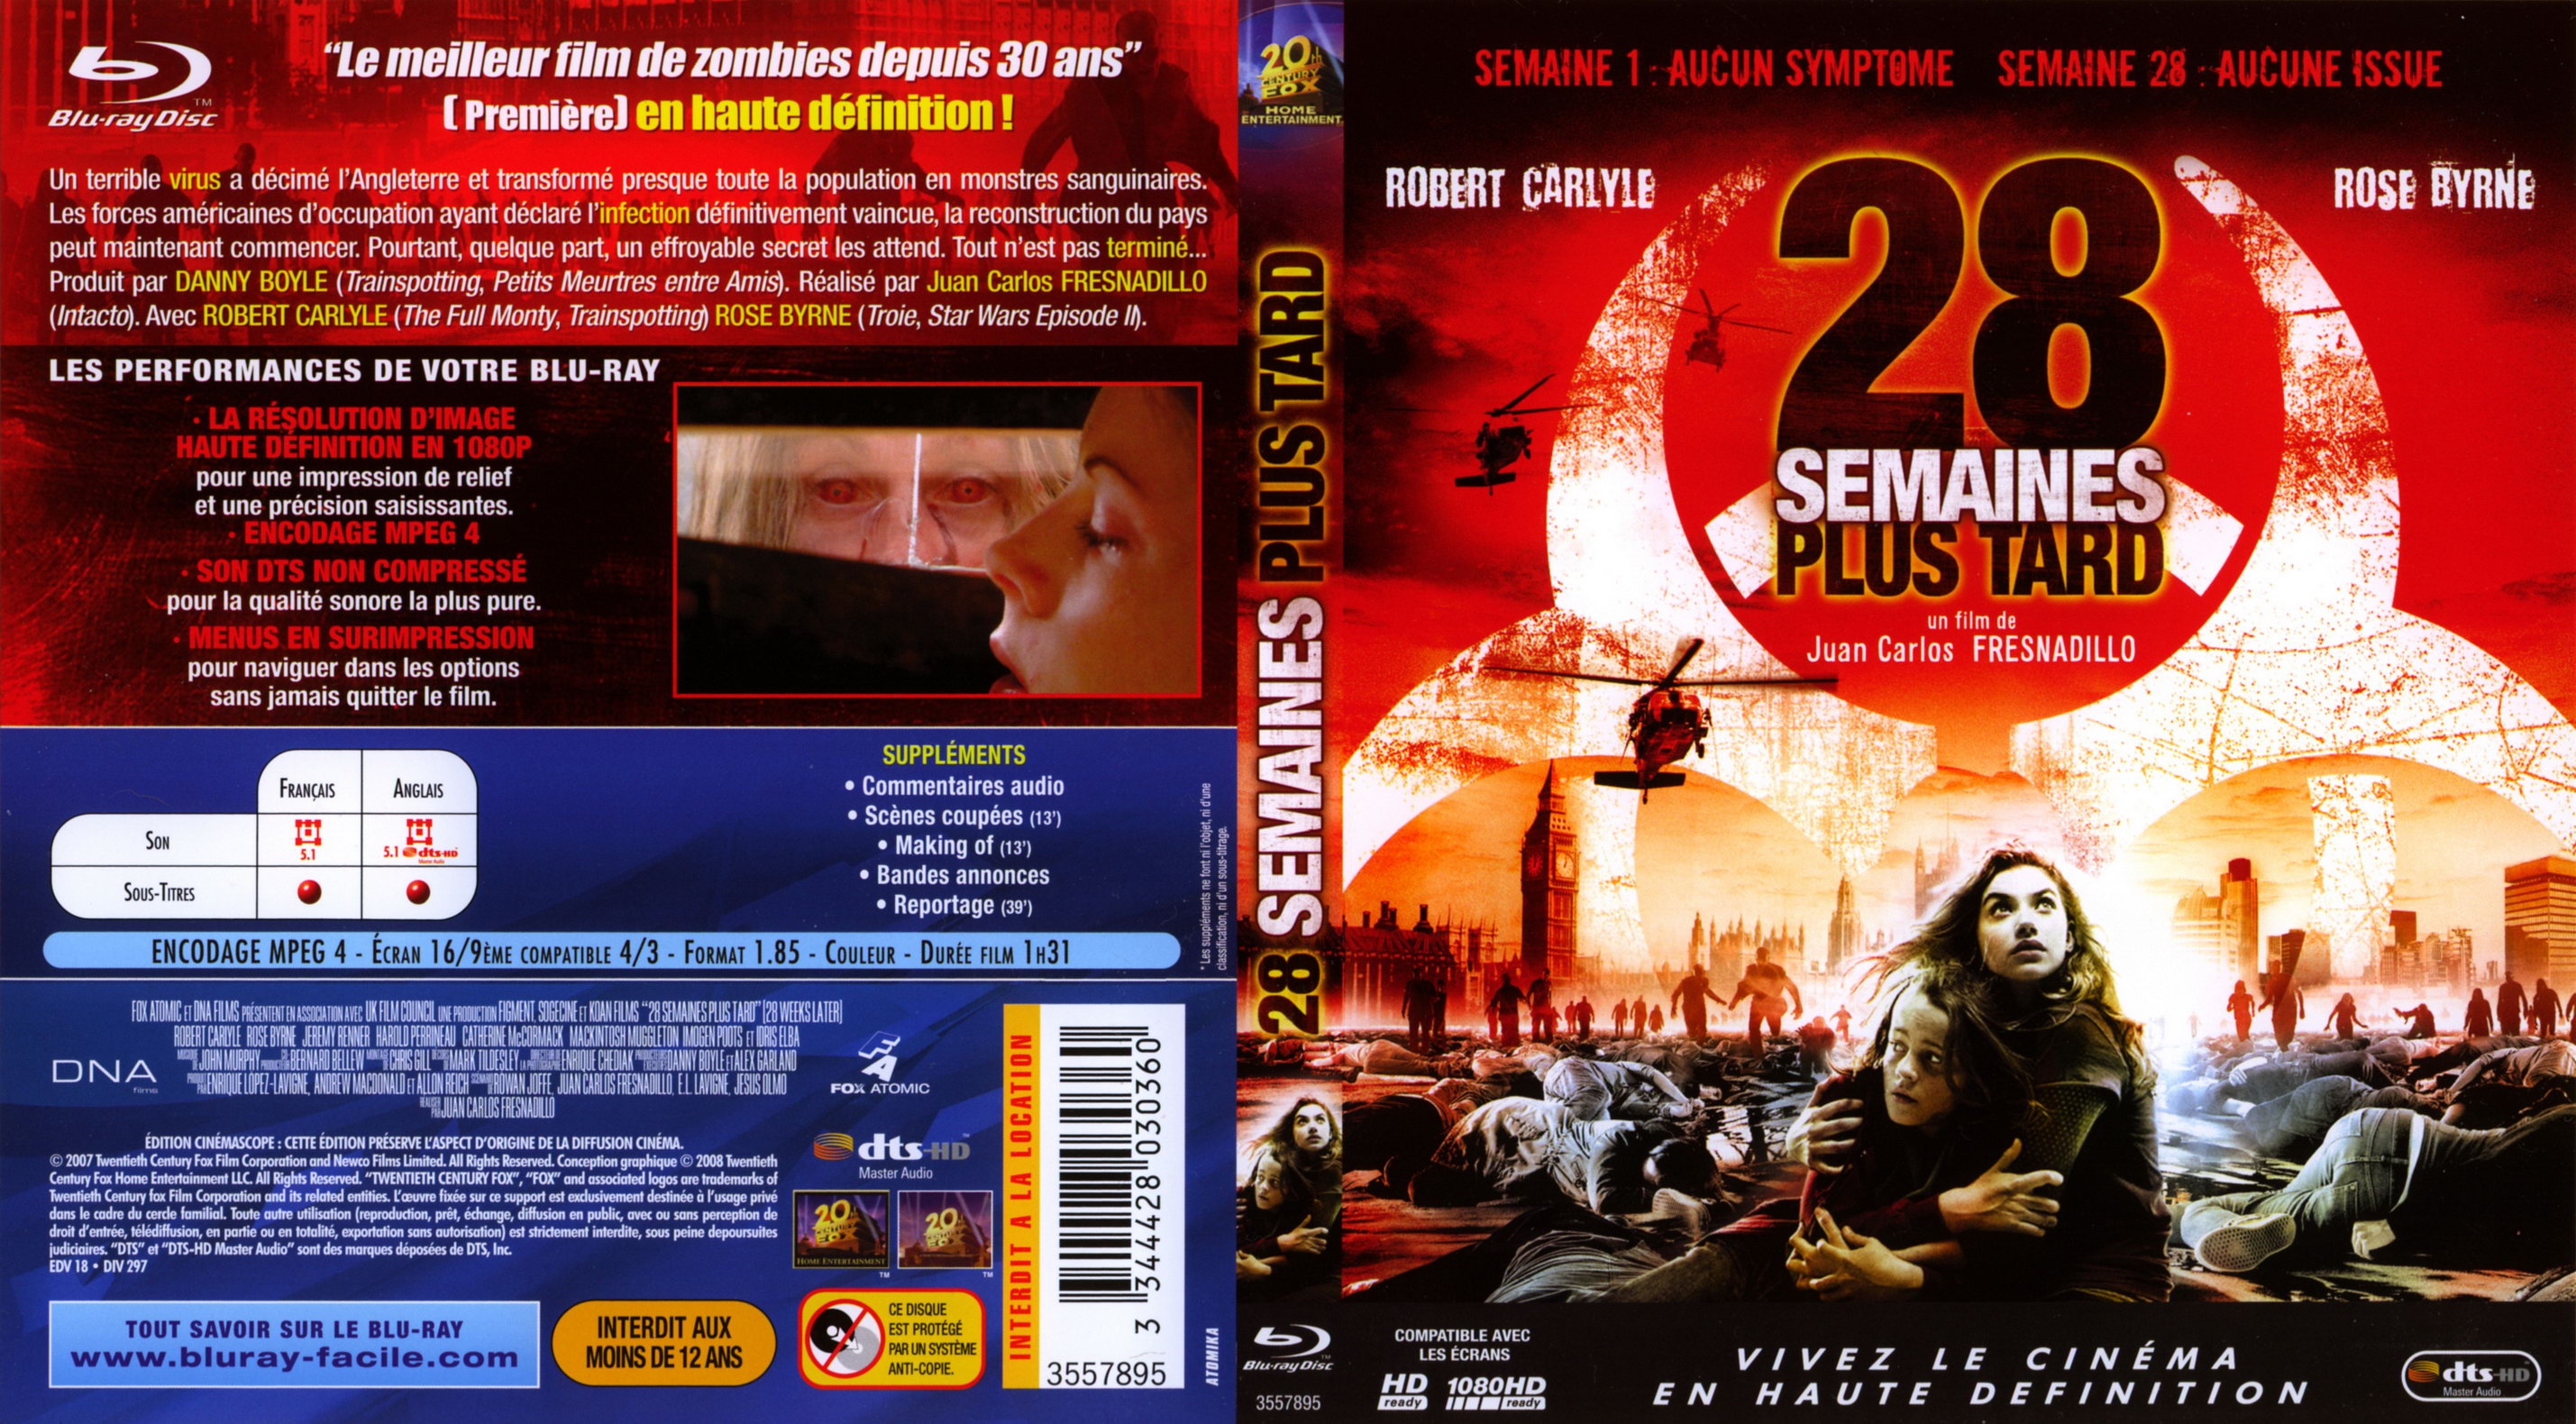 Jaquette DVD 28 semaines plus tard (BLU-RAY)